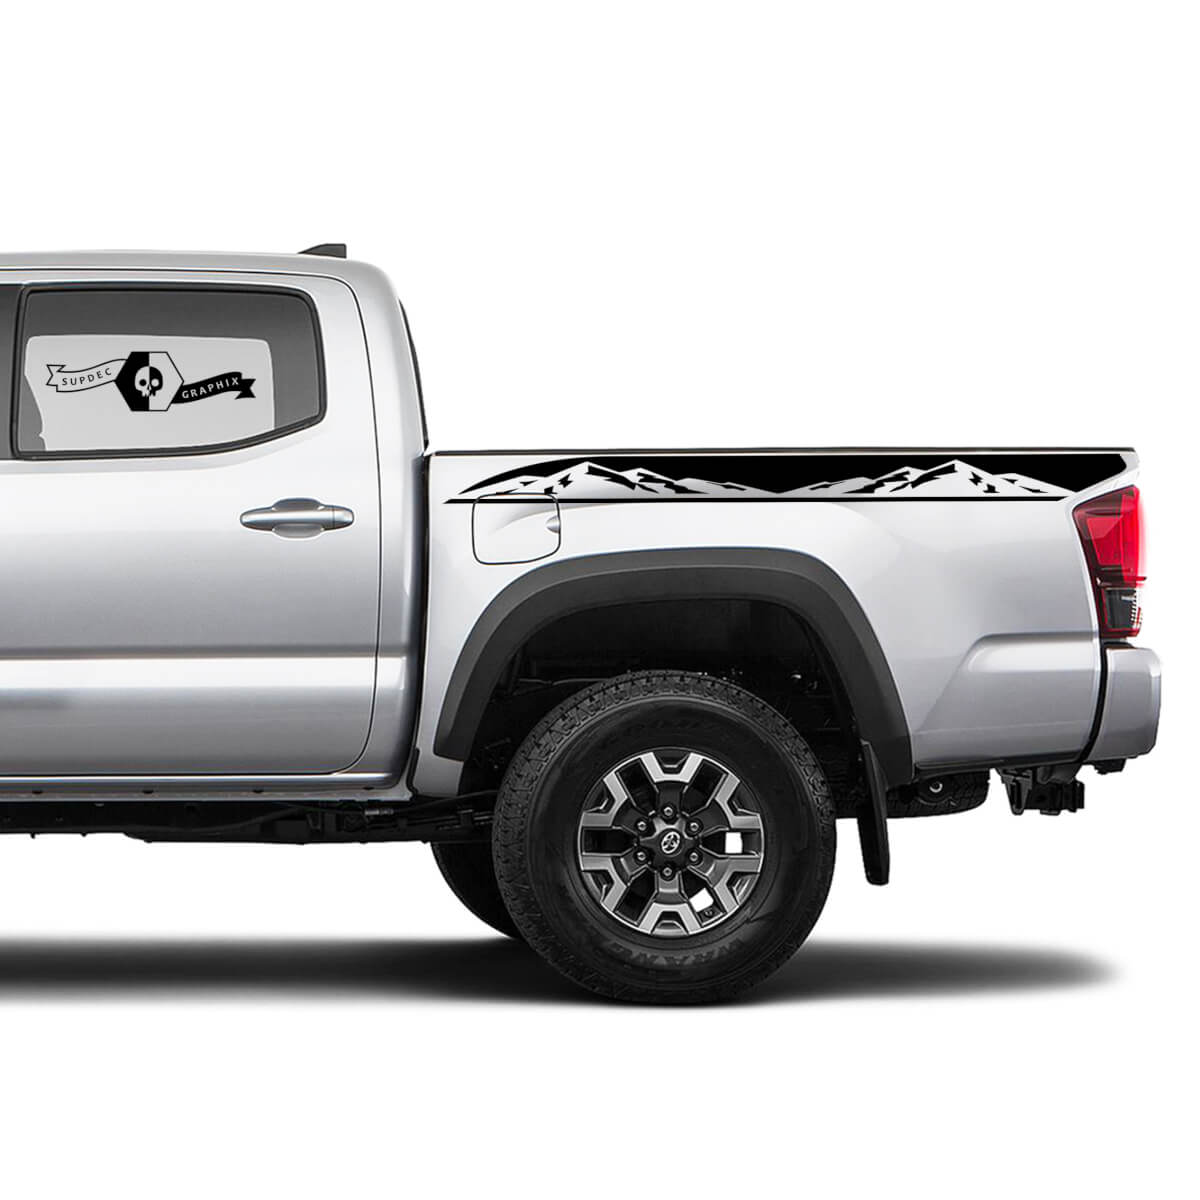 Mountains Style for Side Truck Decals Stickers for Tacoma Tundra Hilux 4Runner